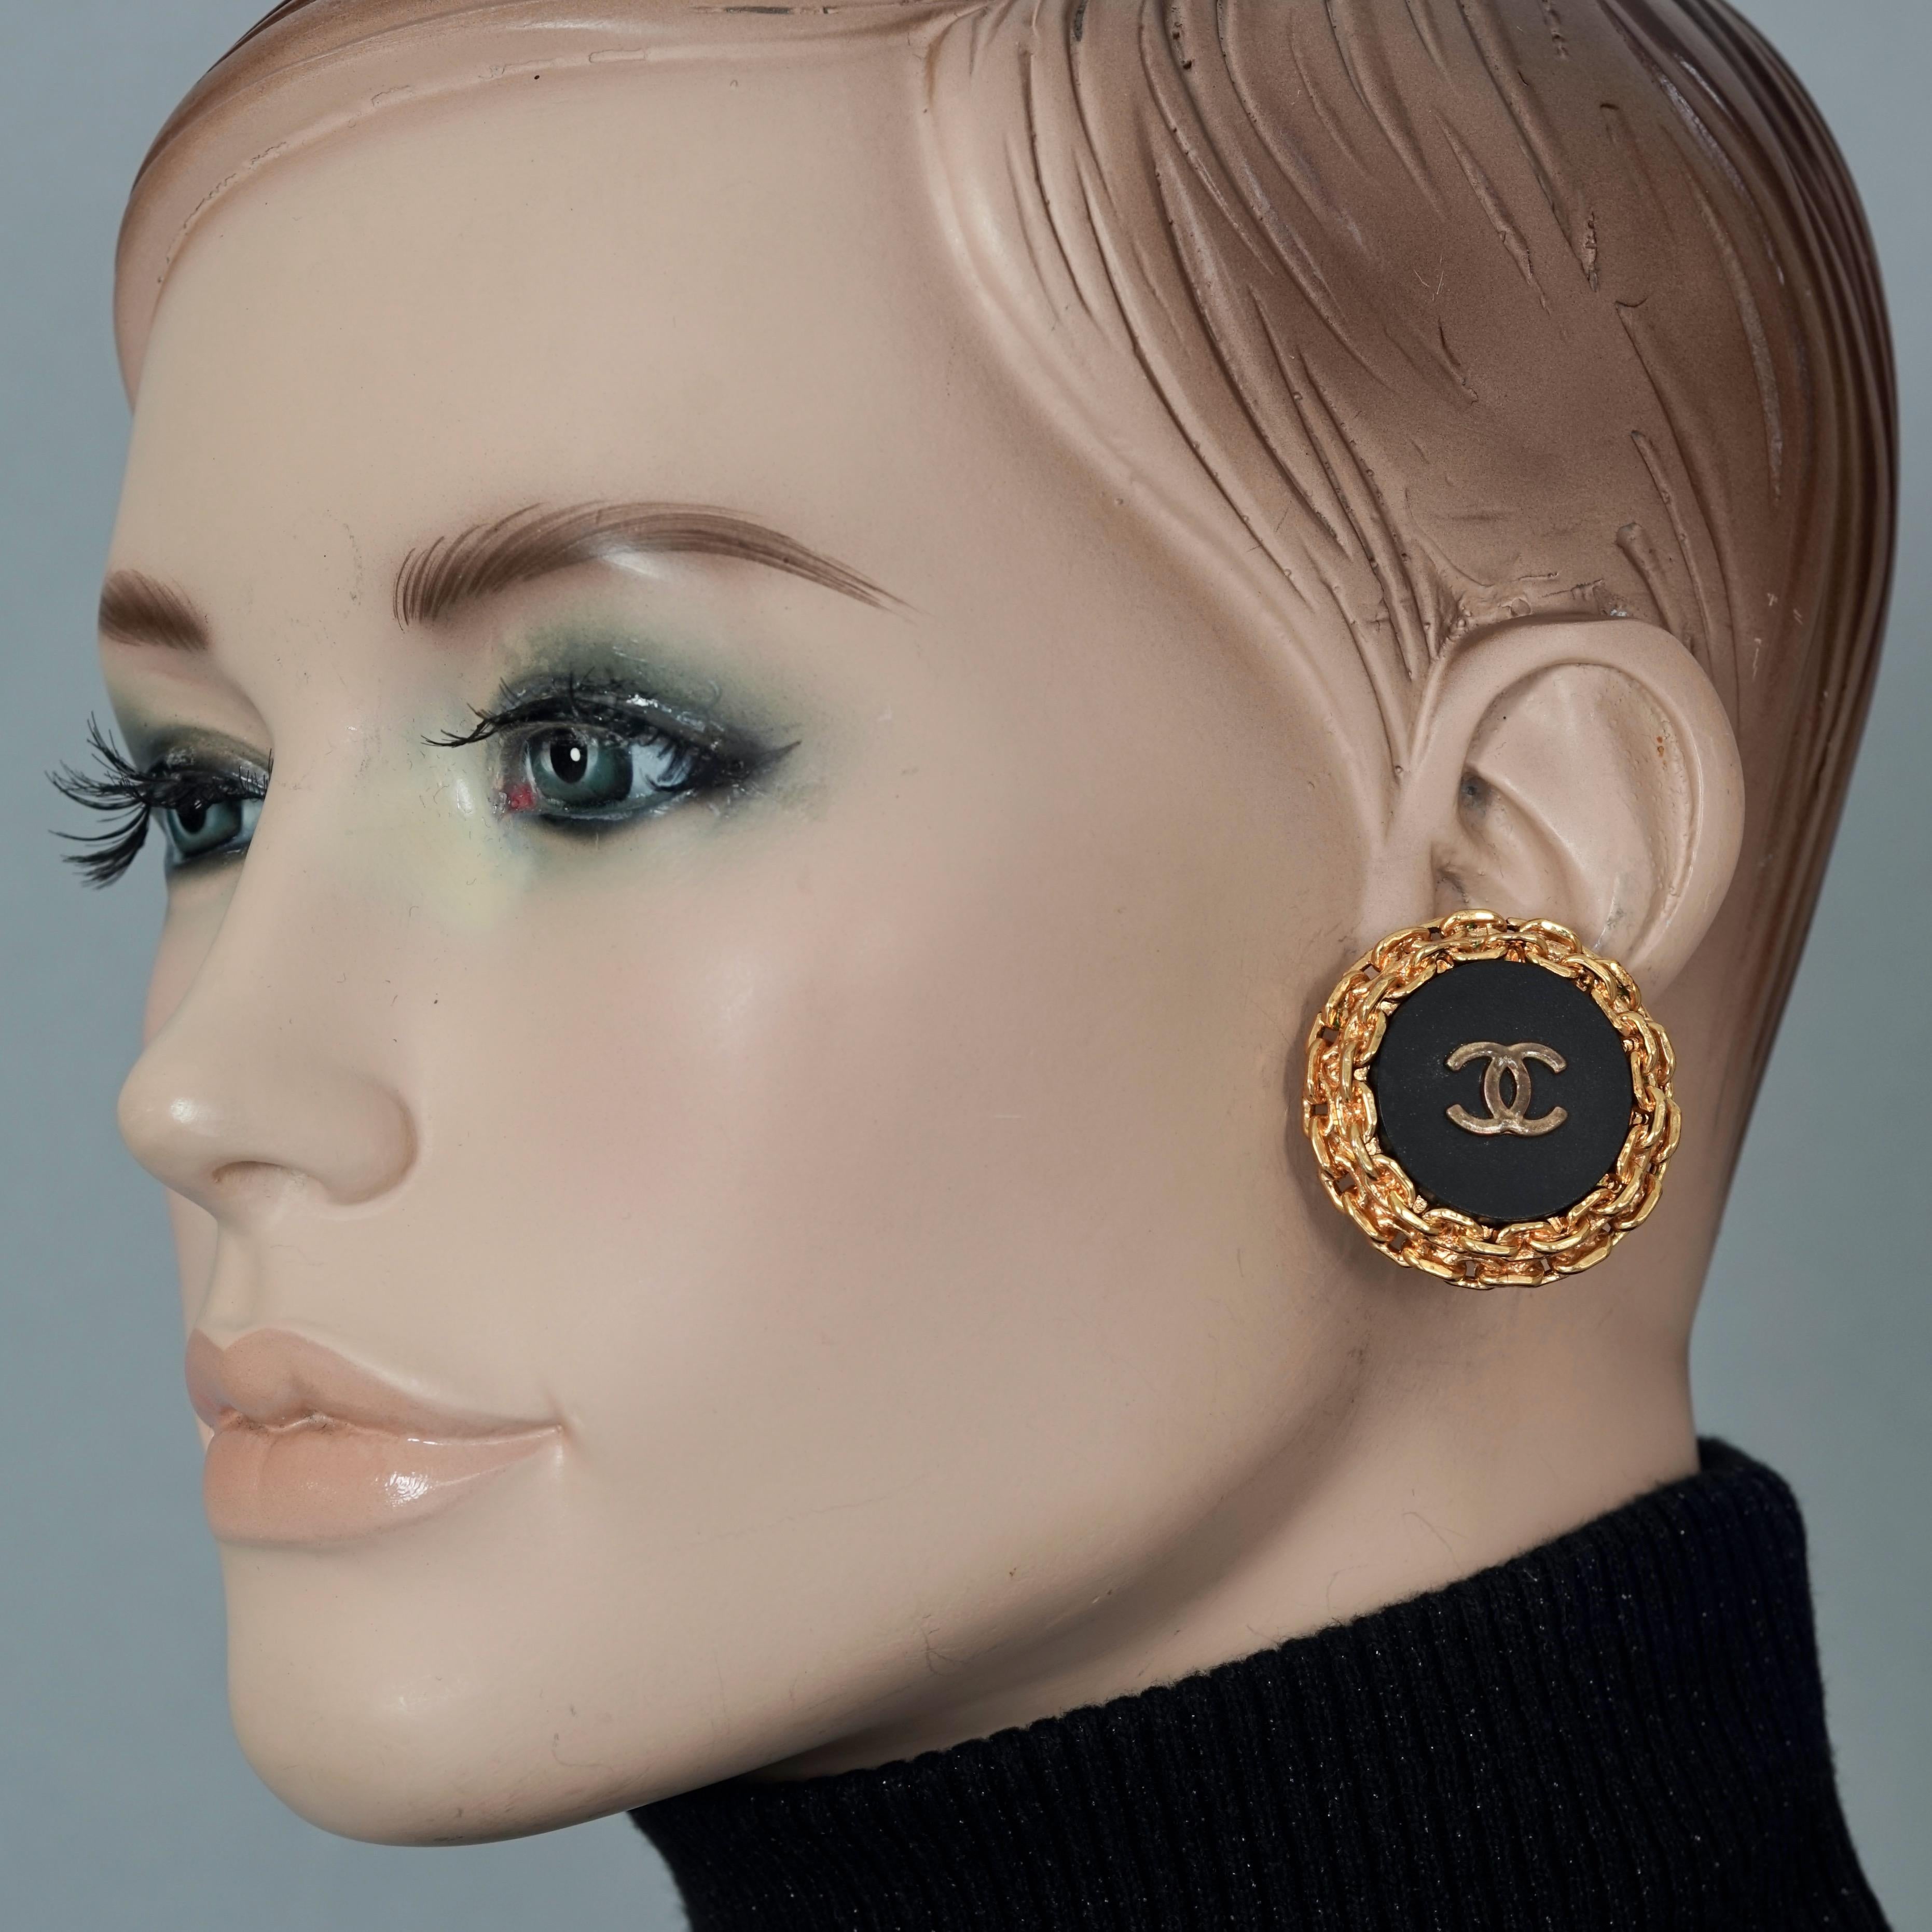 Vintage 1993 CHANEL CC Logo Disc Chain Earrings

Measurements:
Height: 1.38 inches (3.5 cm)
Width: 1.38 inches (3.5 cm)
Weight per Earring: 22 grams

Features:
- 100% Authentic CHANEL.
- Embossed Chanel CC logo on a black resin.
- Rim is with chain